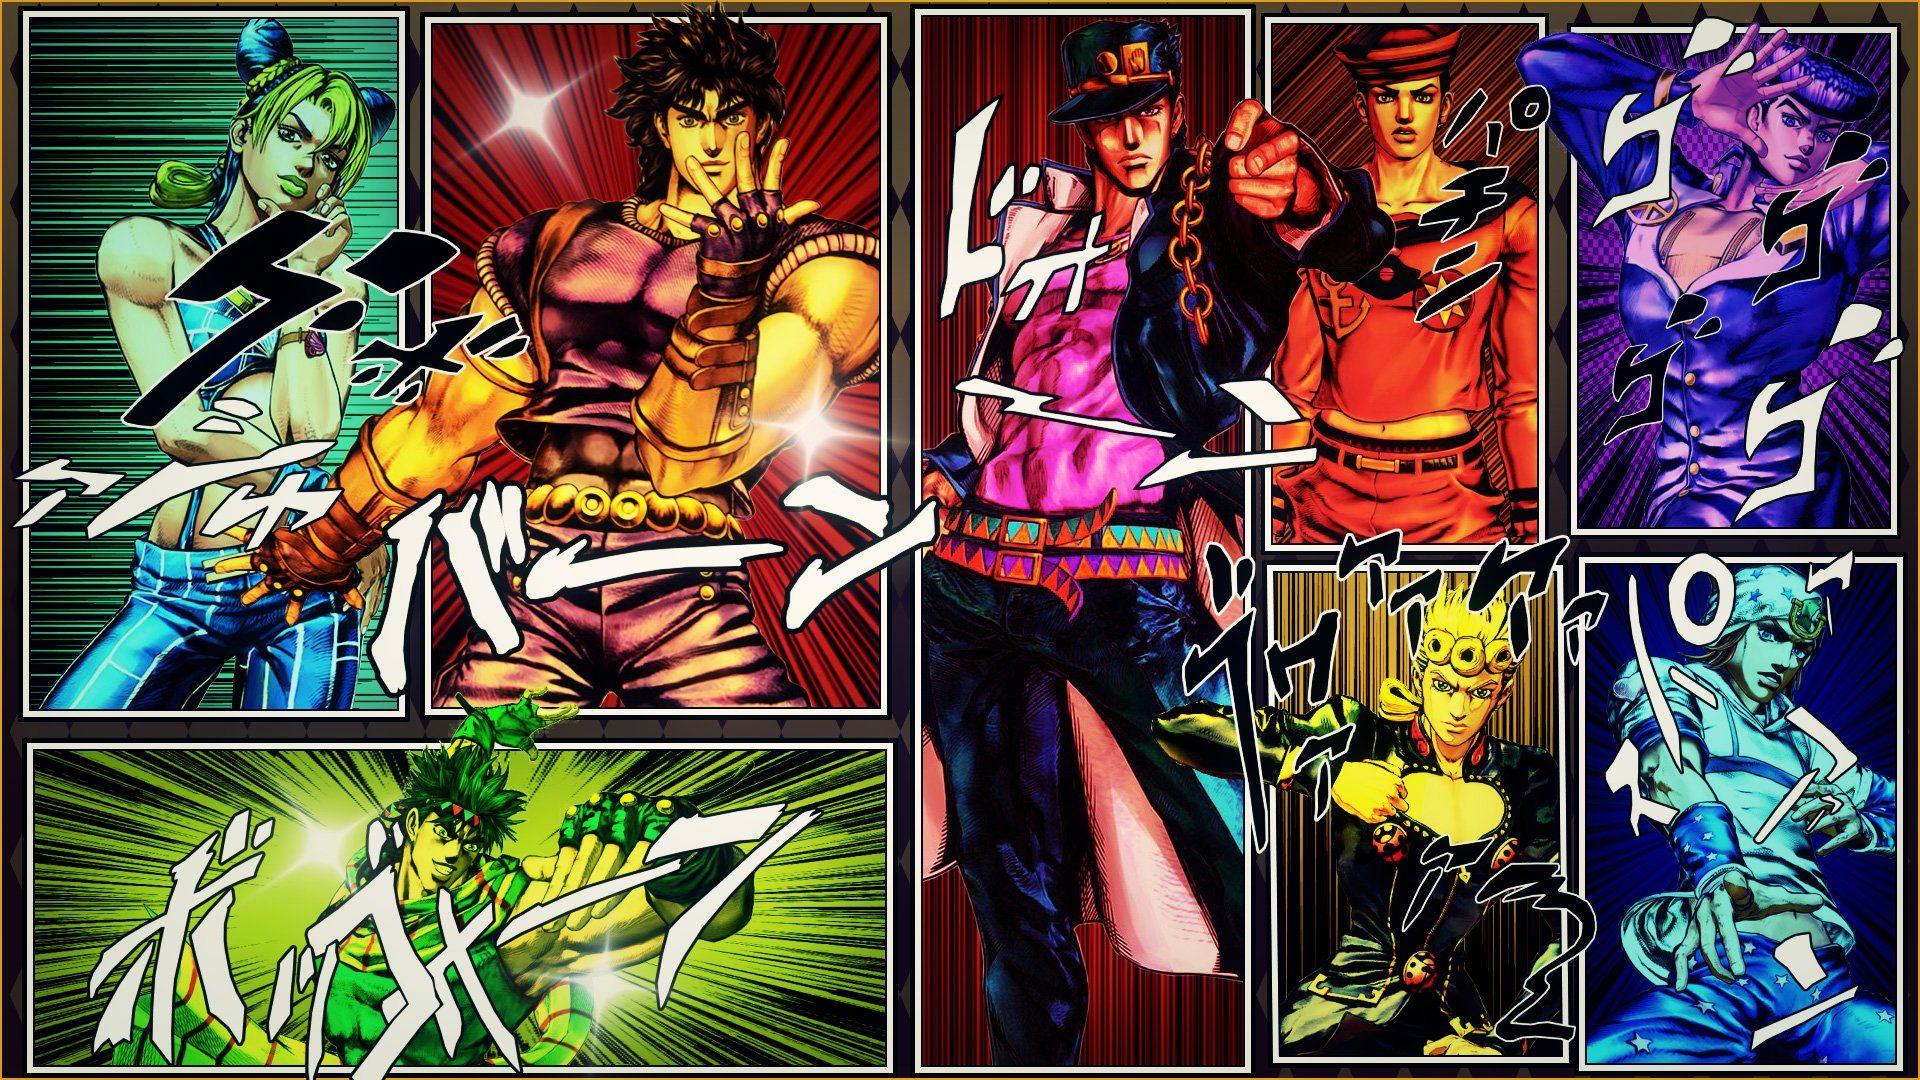 Download Caption: Iconic Jojo Pose in Action Wallpaper